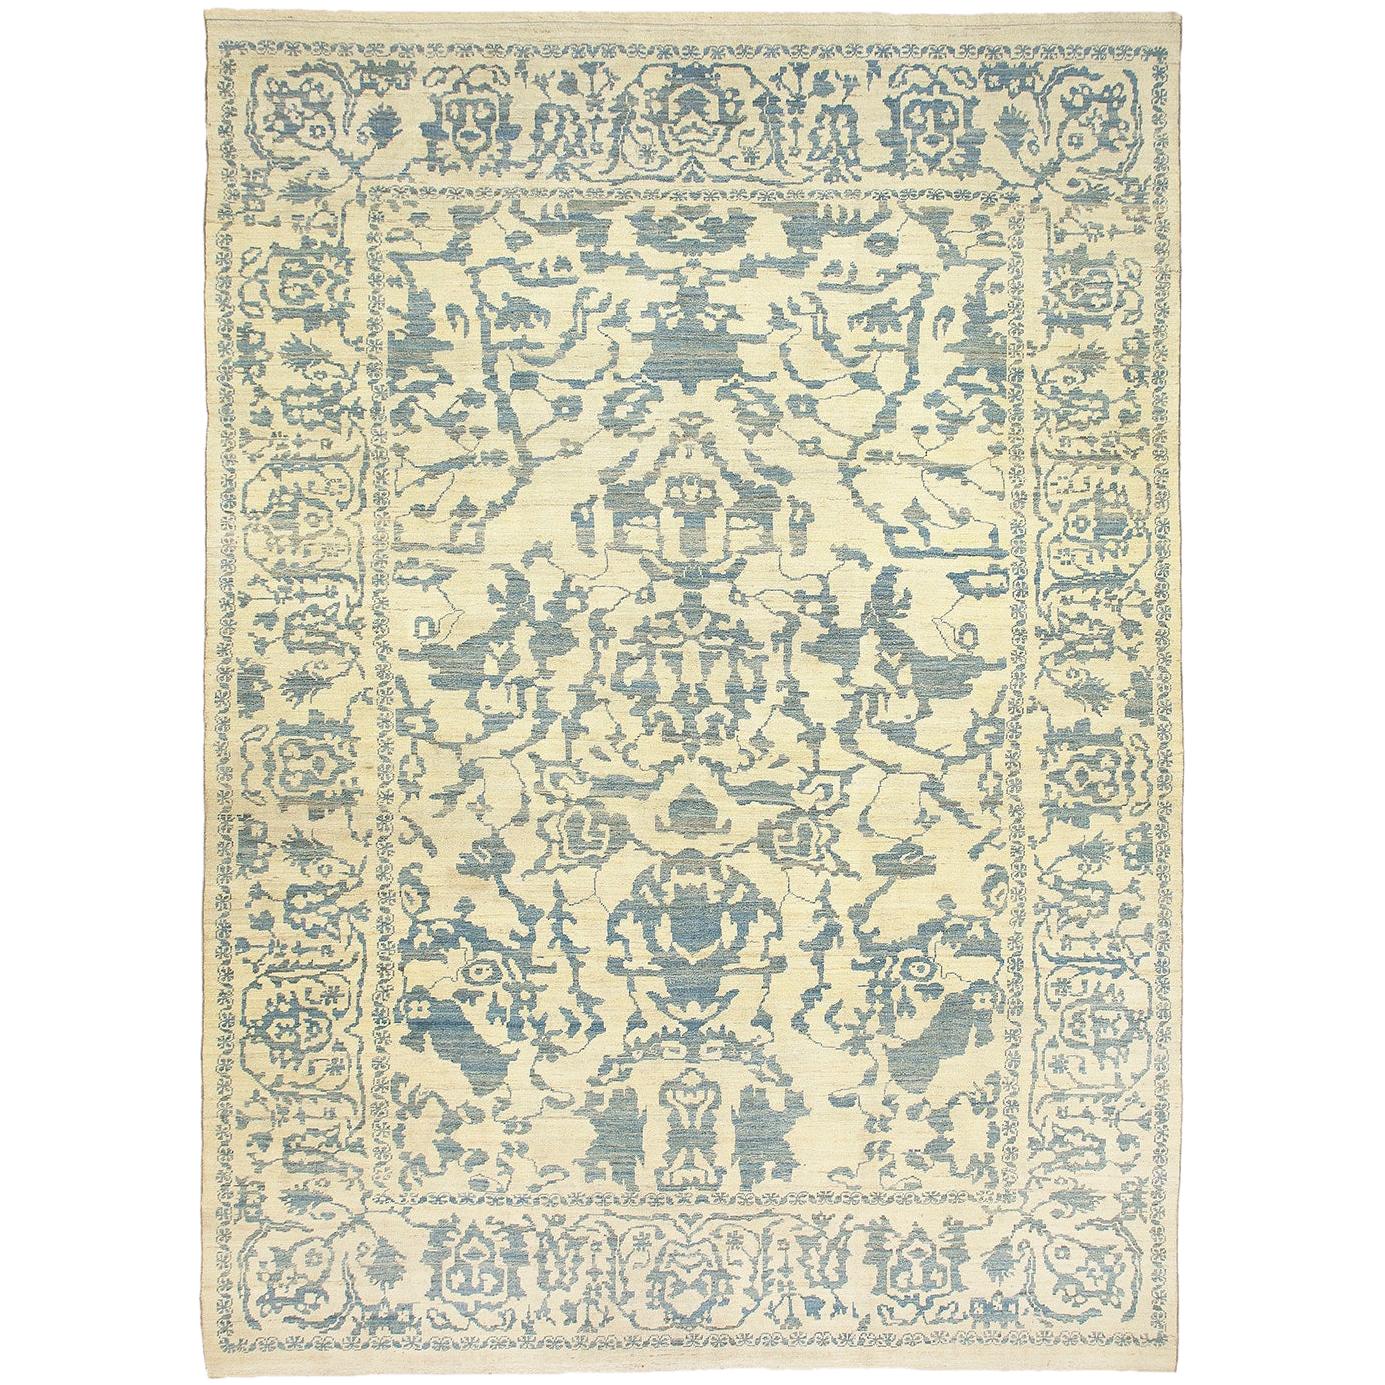 New Turkish Oushak Rug with Blue and Ivory Floral Field